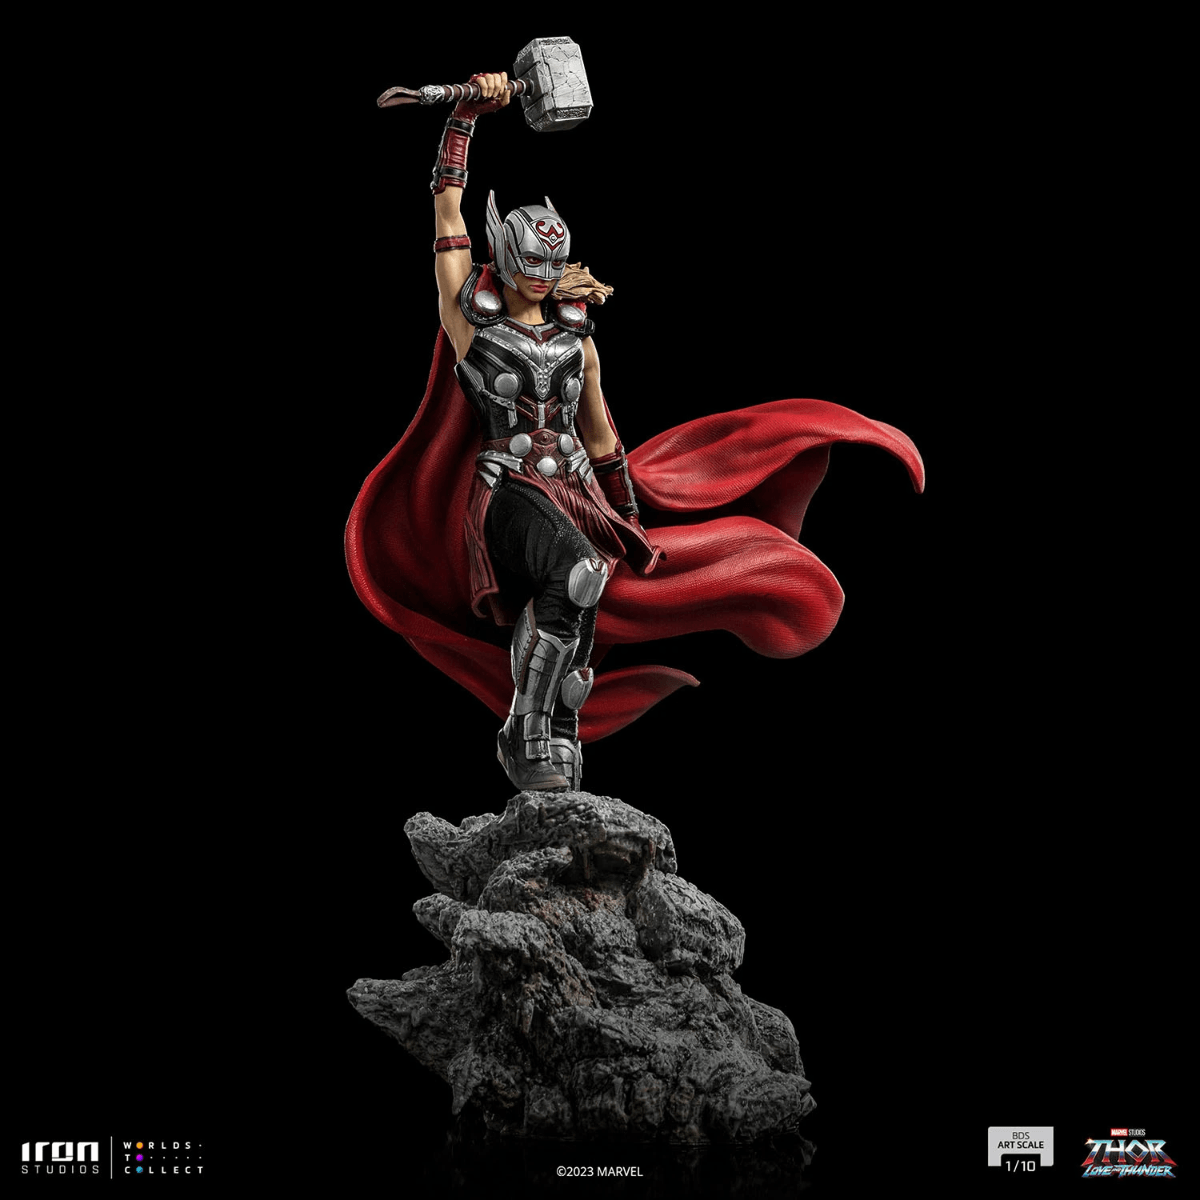 IRO51260 Thor 4: Love and Thunder - Mighty Thor (Jane Foster) 1:10 Scale Statue - Iron Studios - Titan Pop Culture